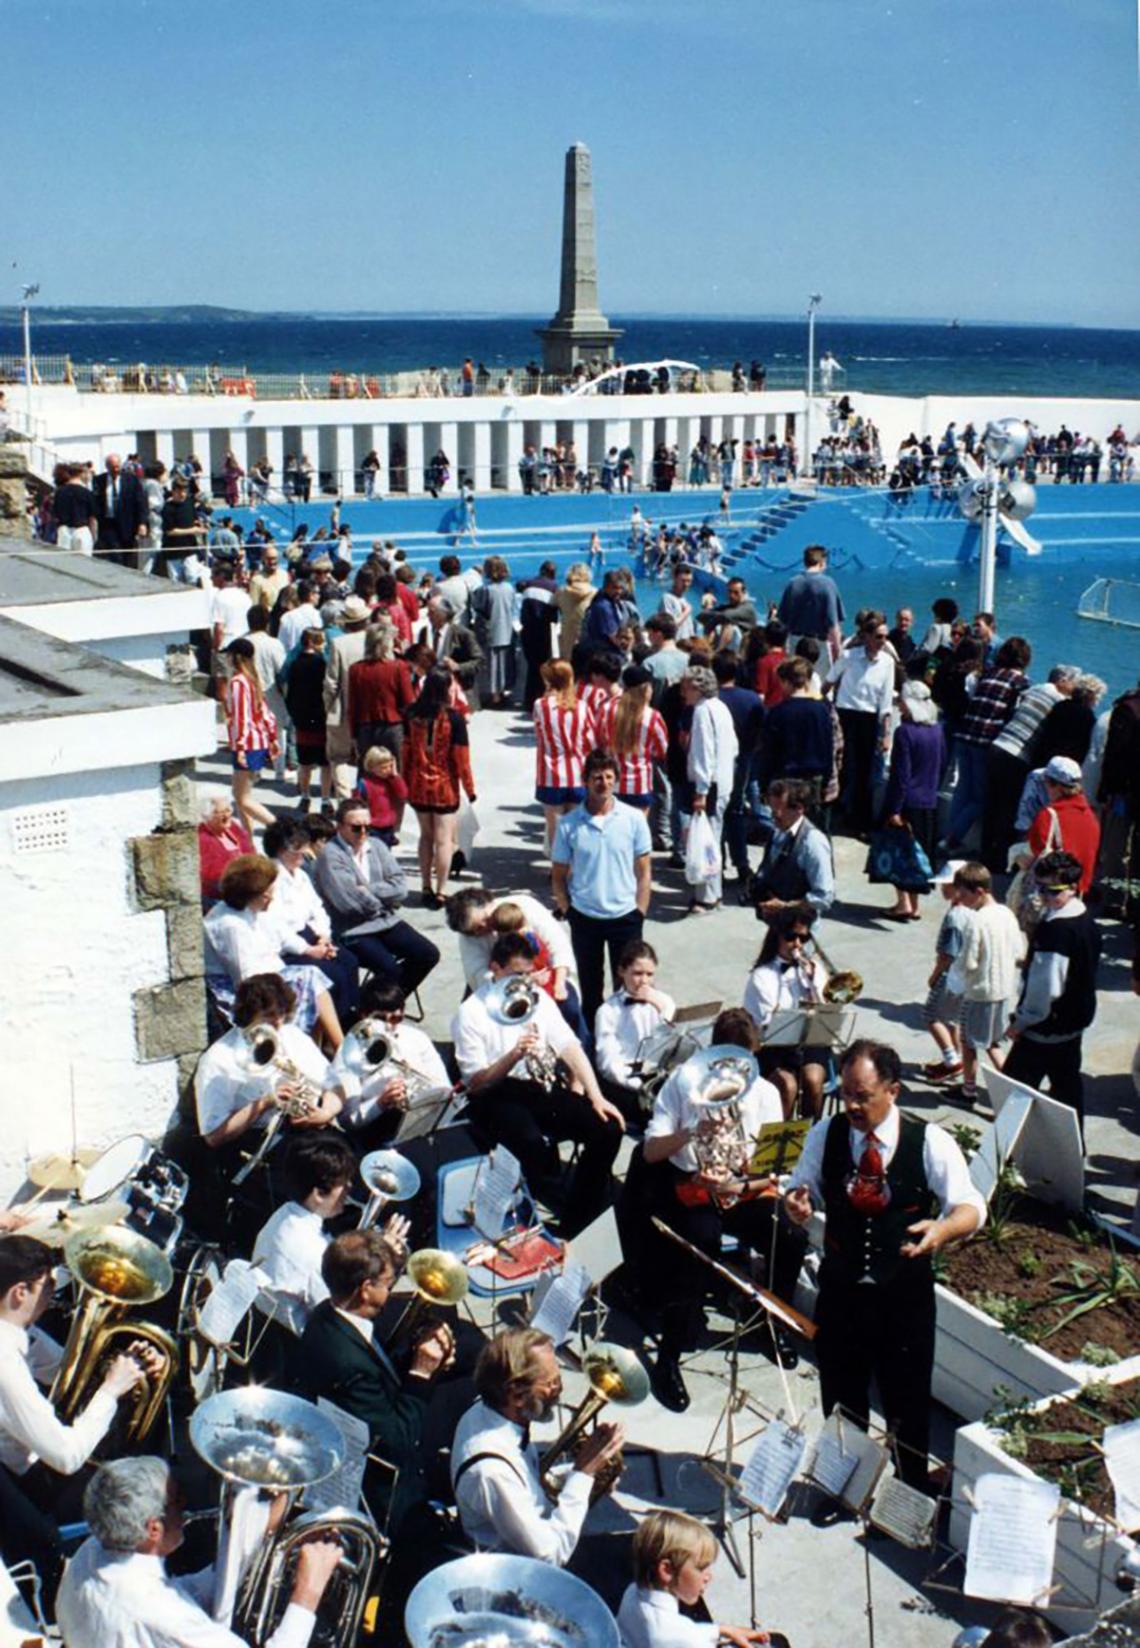 Band at 'Grand Re-opening' of Jubilee Pool in 1994